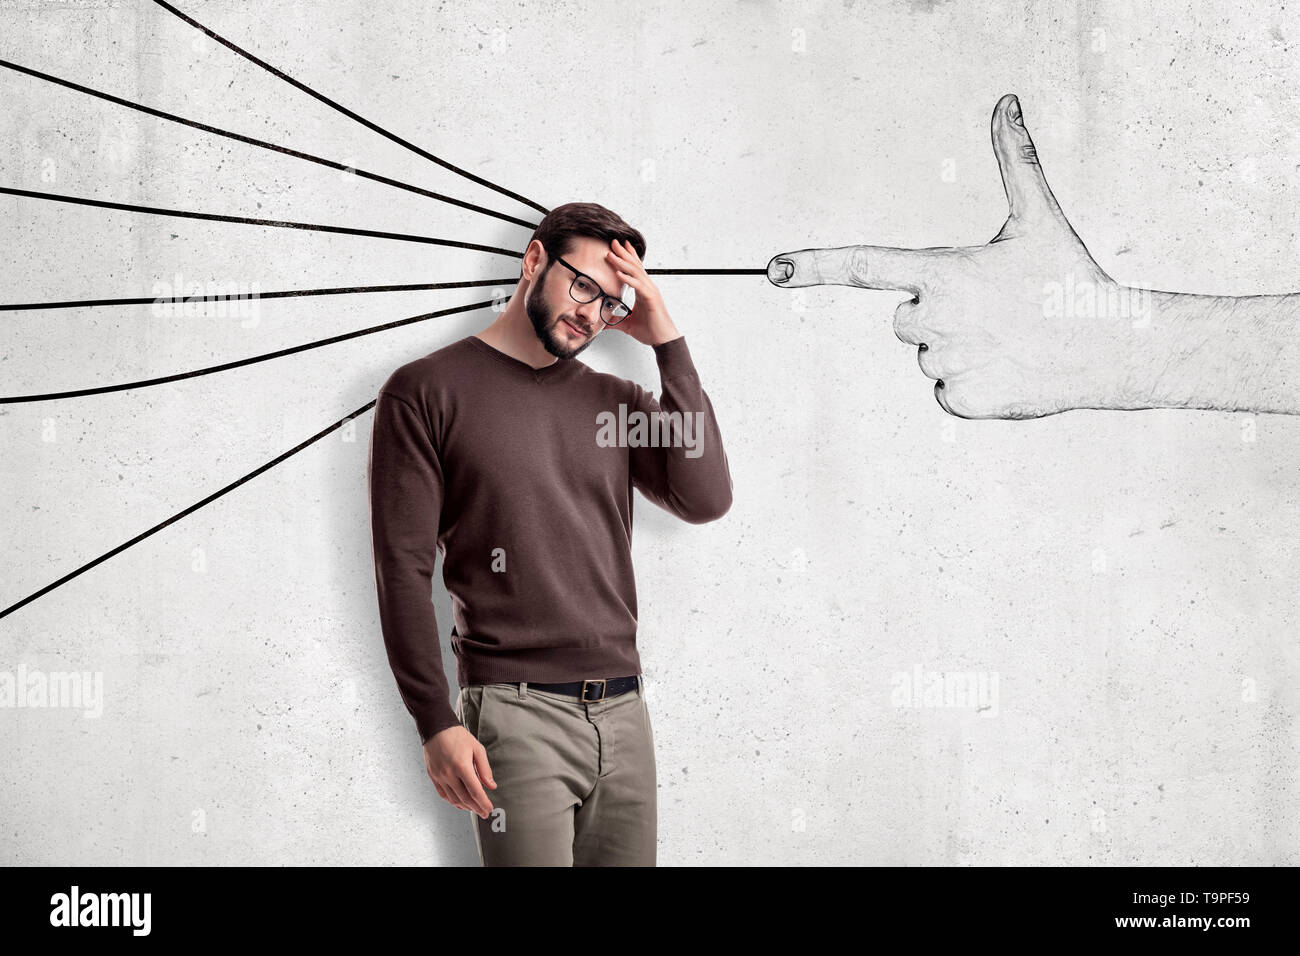 Handsome man in casual clothes standing in half-turn, with hand on forehead, near wall with drawing of finger gun shooting at him. Stock Photo